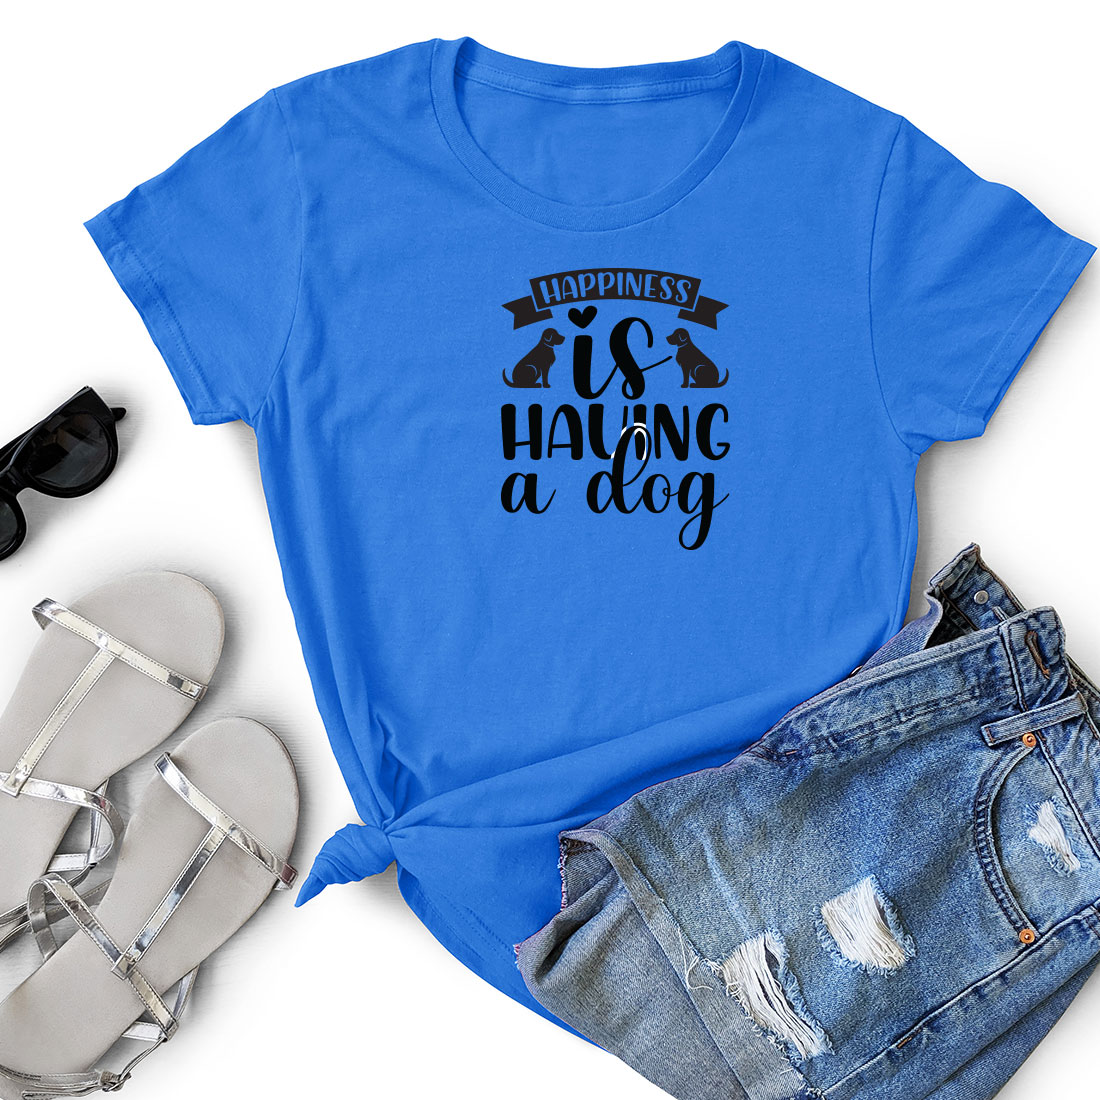 T - shirt that says happiness is having a dog.